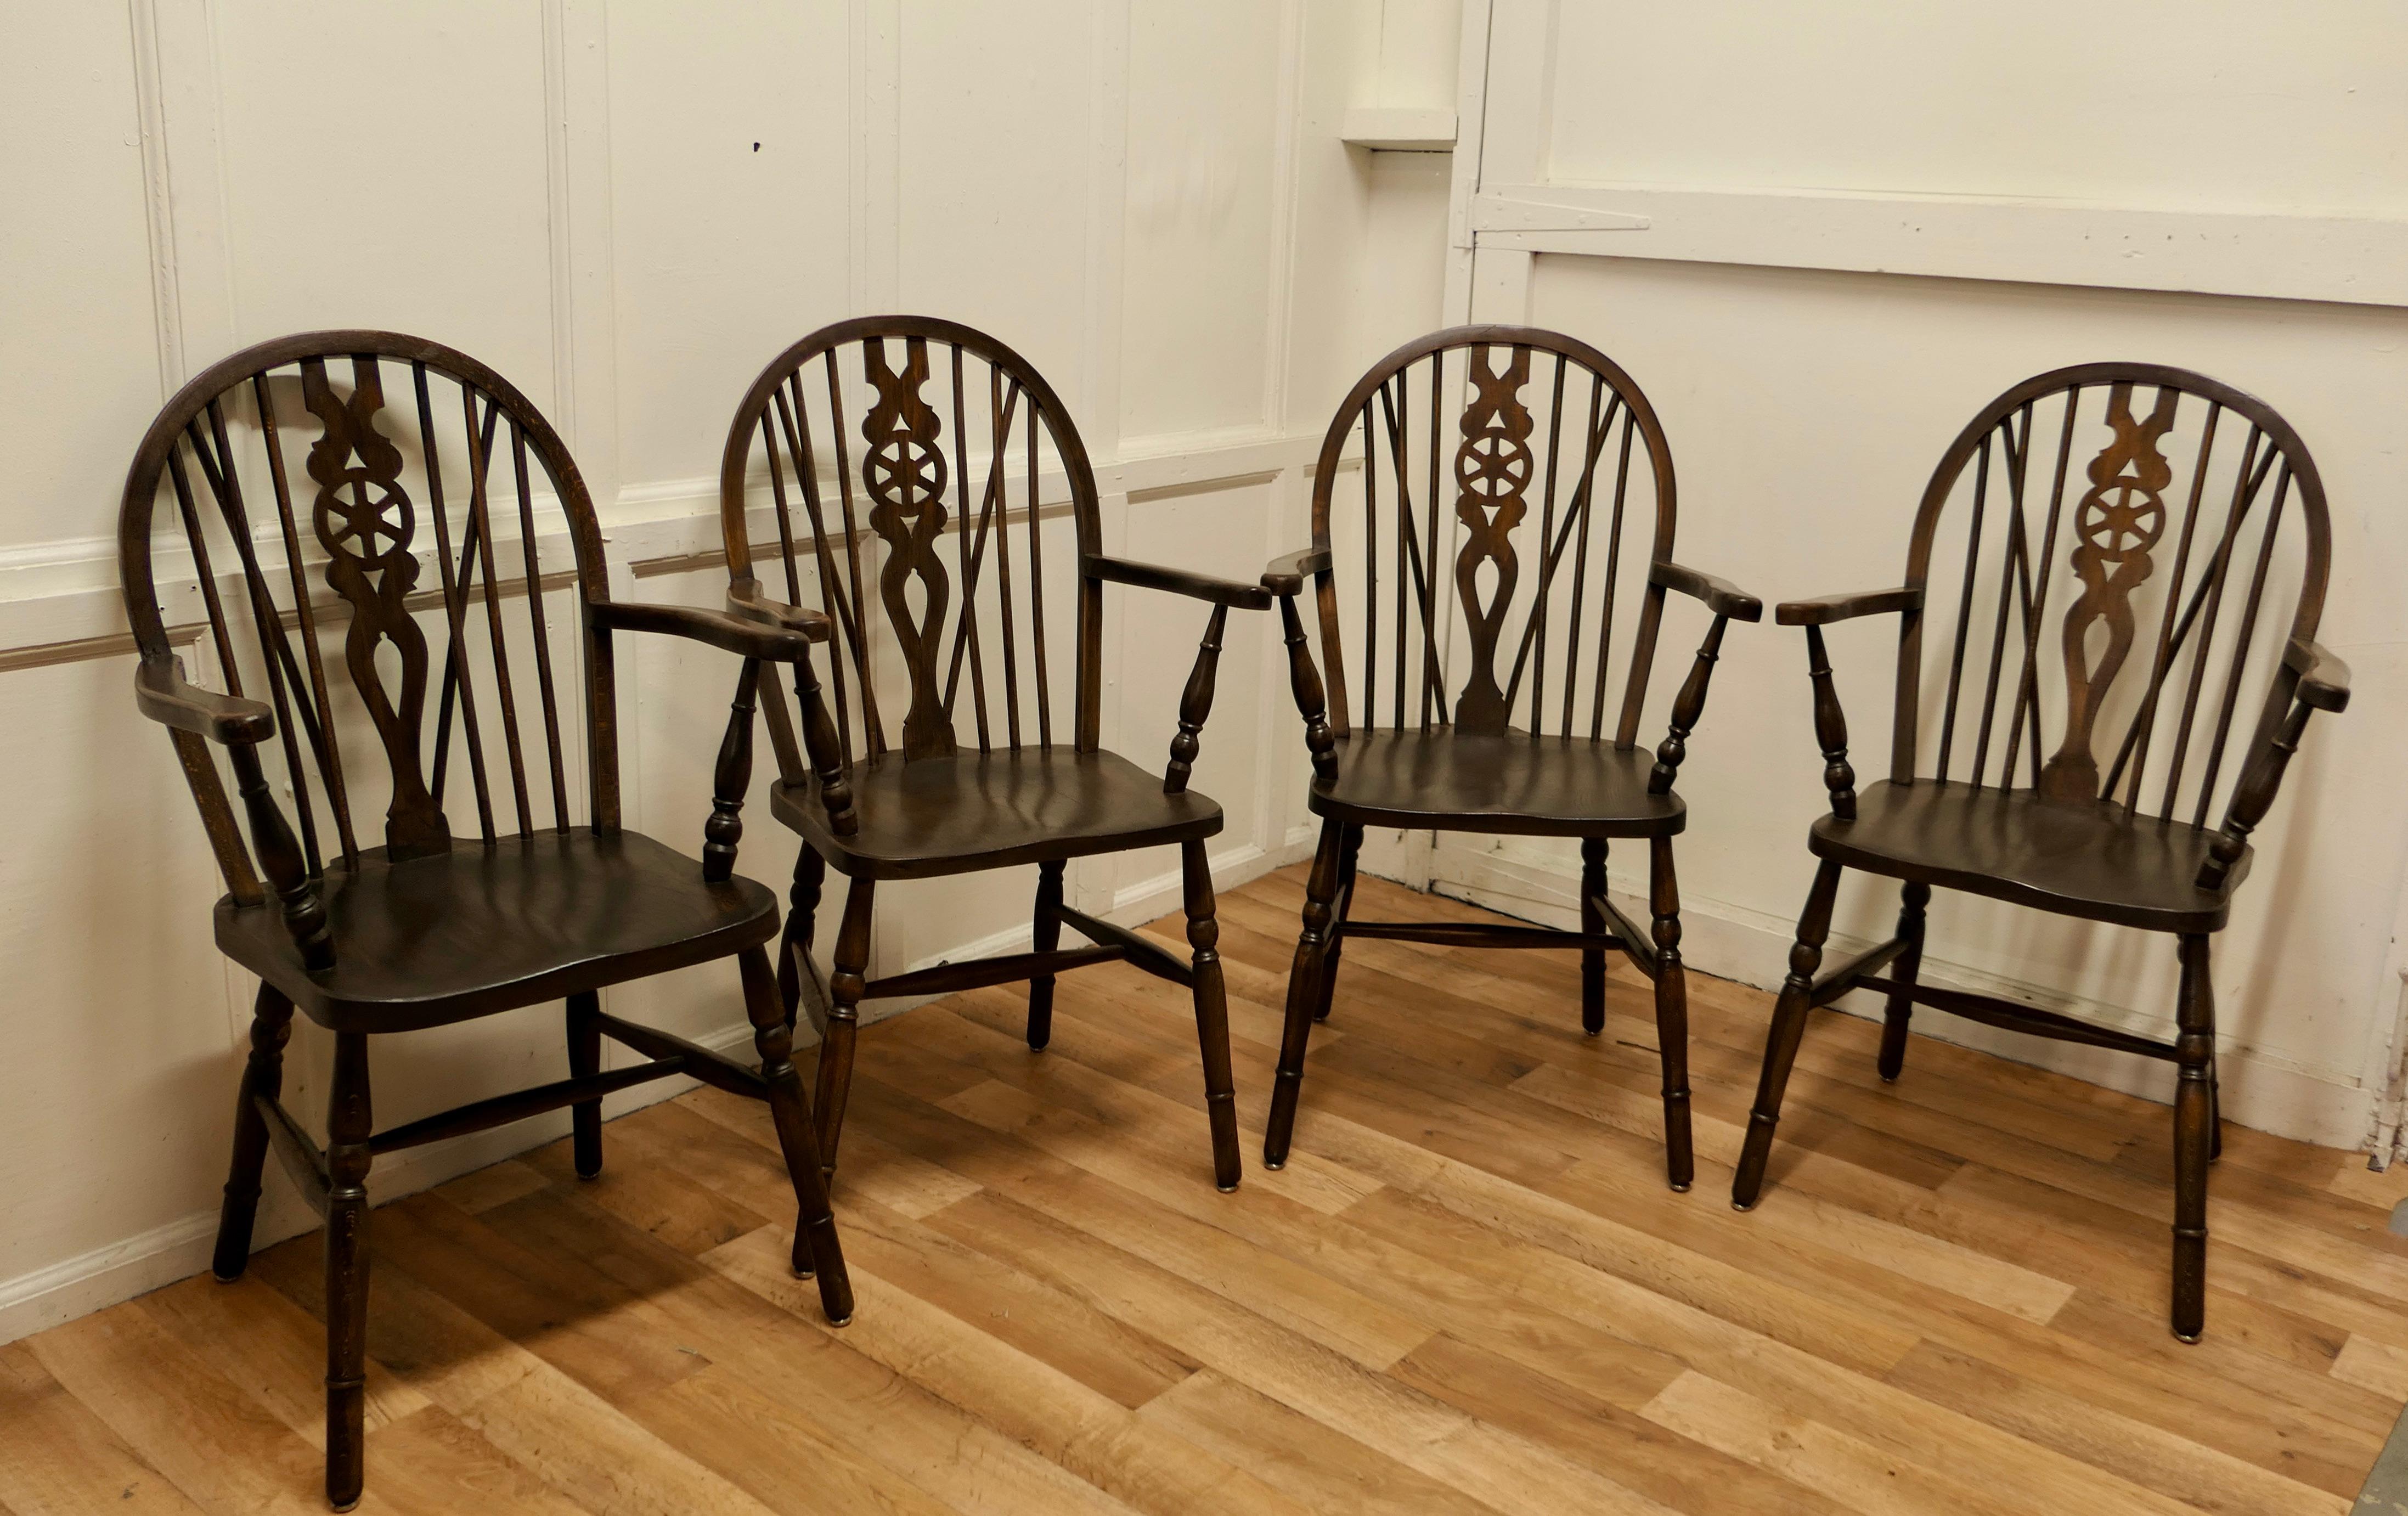 Set of 4 Beech and Elm Wheel Back Carver Chairs


The Chairs are large pieces with a Saddle seat and turned stretchered legs The chairs are a timeless classic made from Beech and Elm in the traditional Windsor Hoop Back and Wedge style
A Great